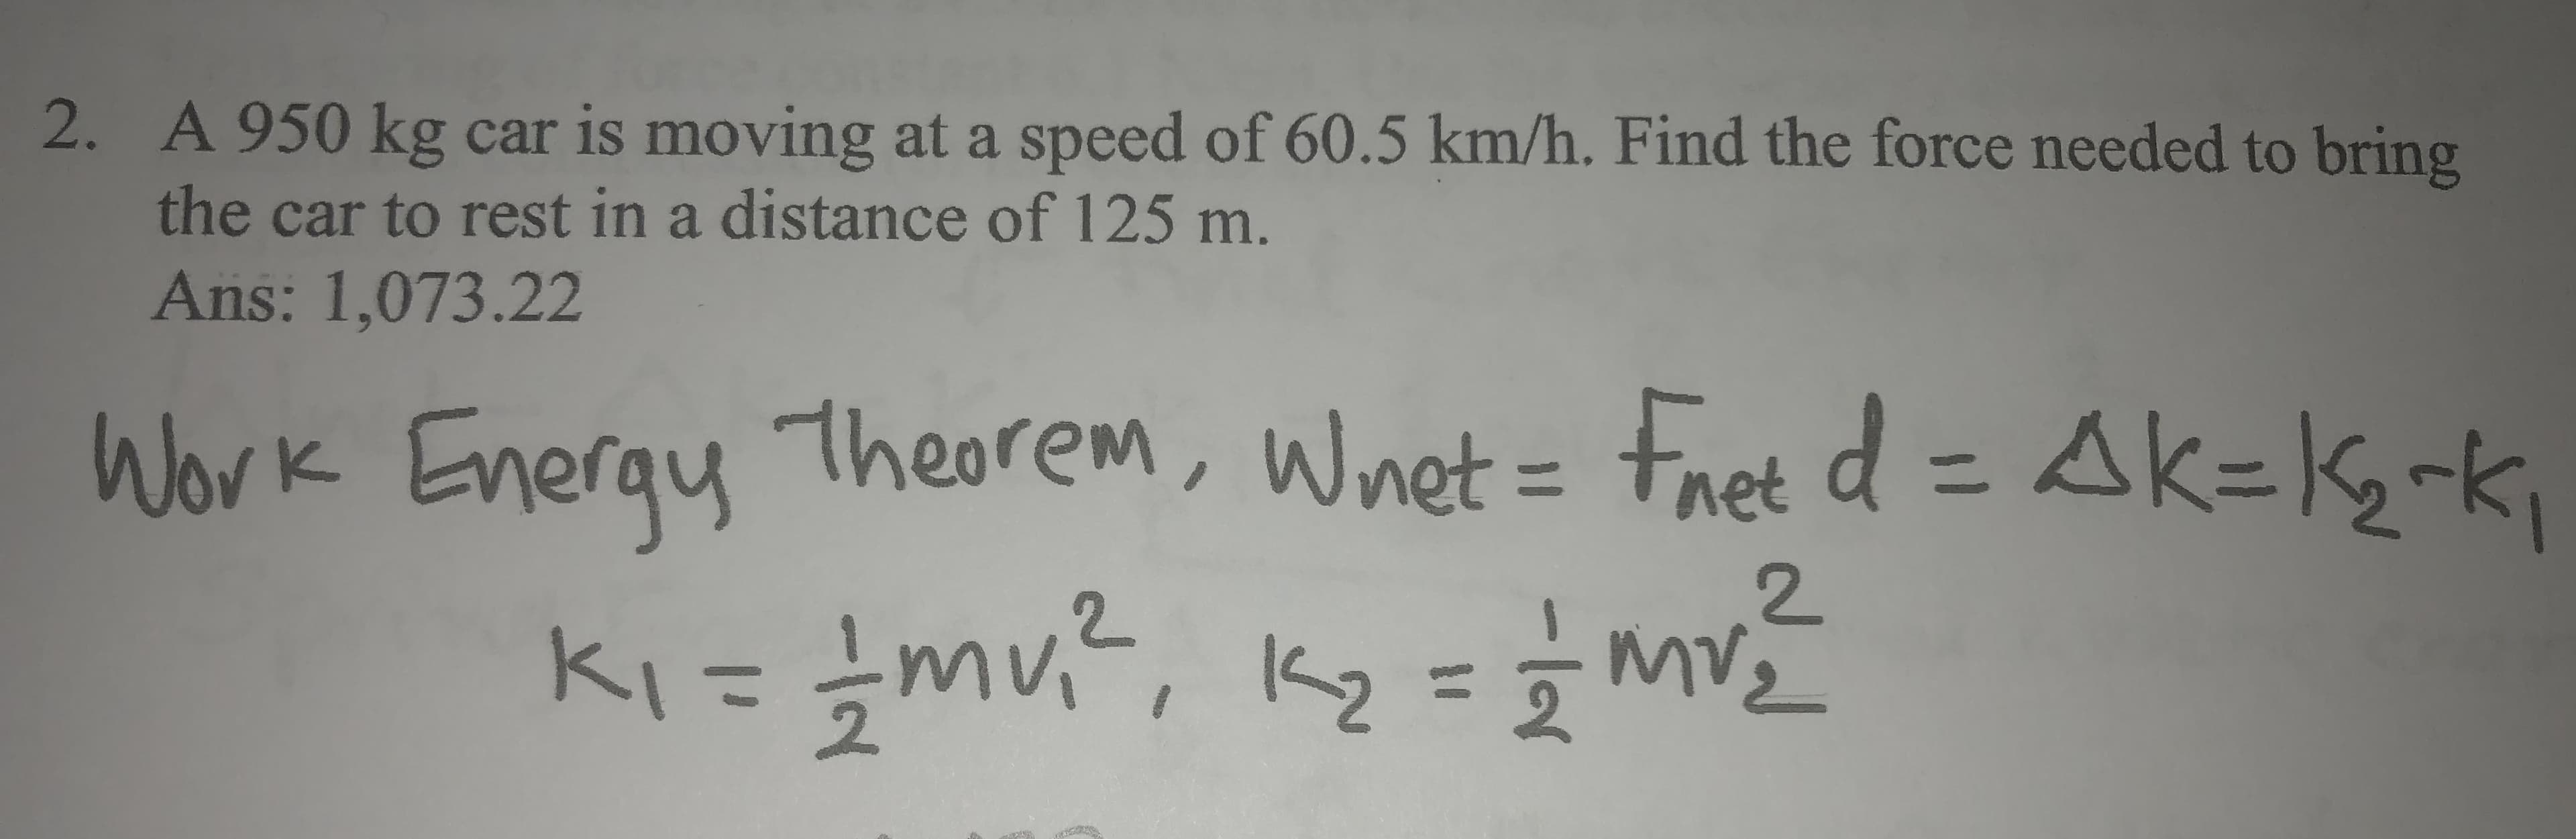 2. A 950 kg car is moving at a speed of 60.5 km/h. Find the force needed to bring
the car to rest in a distance of 125 m.
Ans: 1,073.22
Work Energy
theorem, Wnet - Fret d = Ak=kg-k,
%3D
2.
ki= {mu?, kg =} m
K2
%3D
2.
